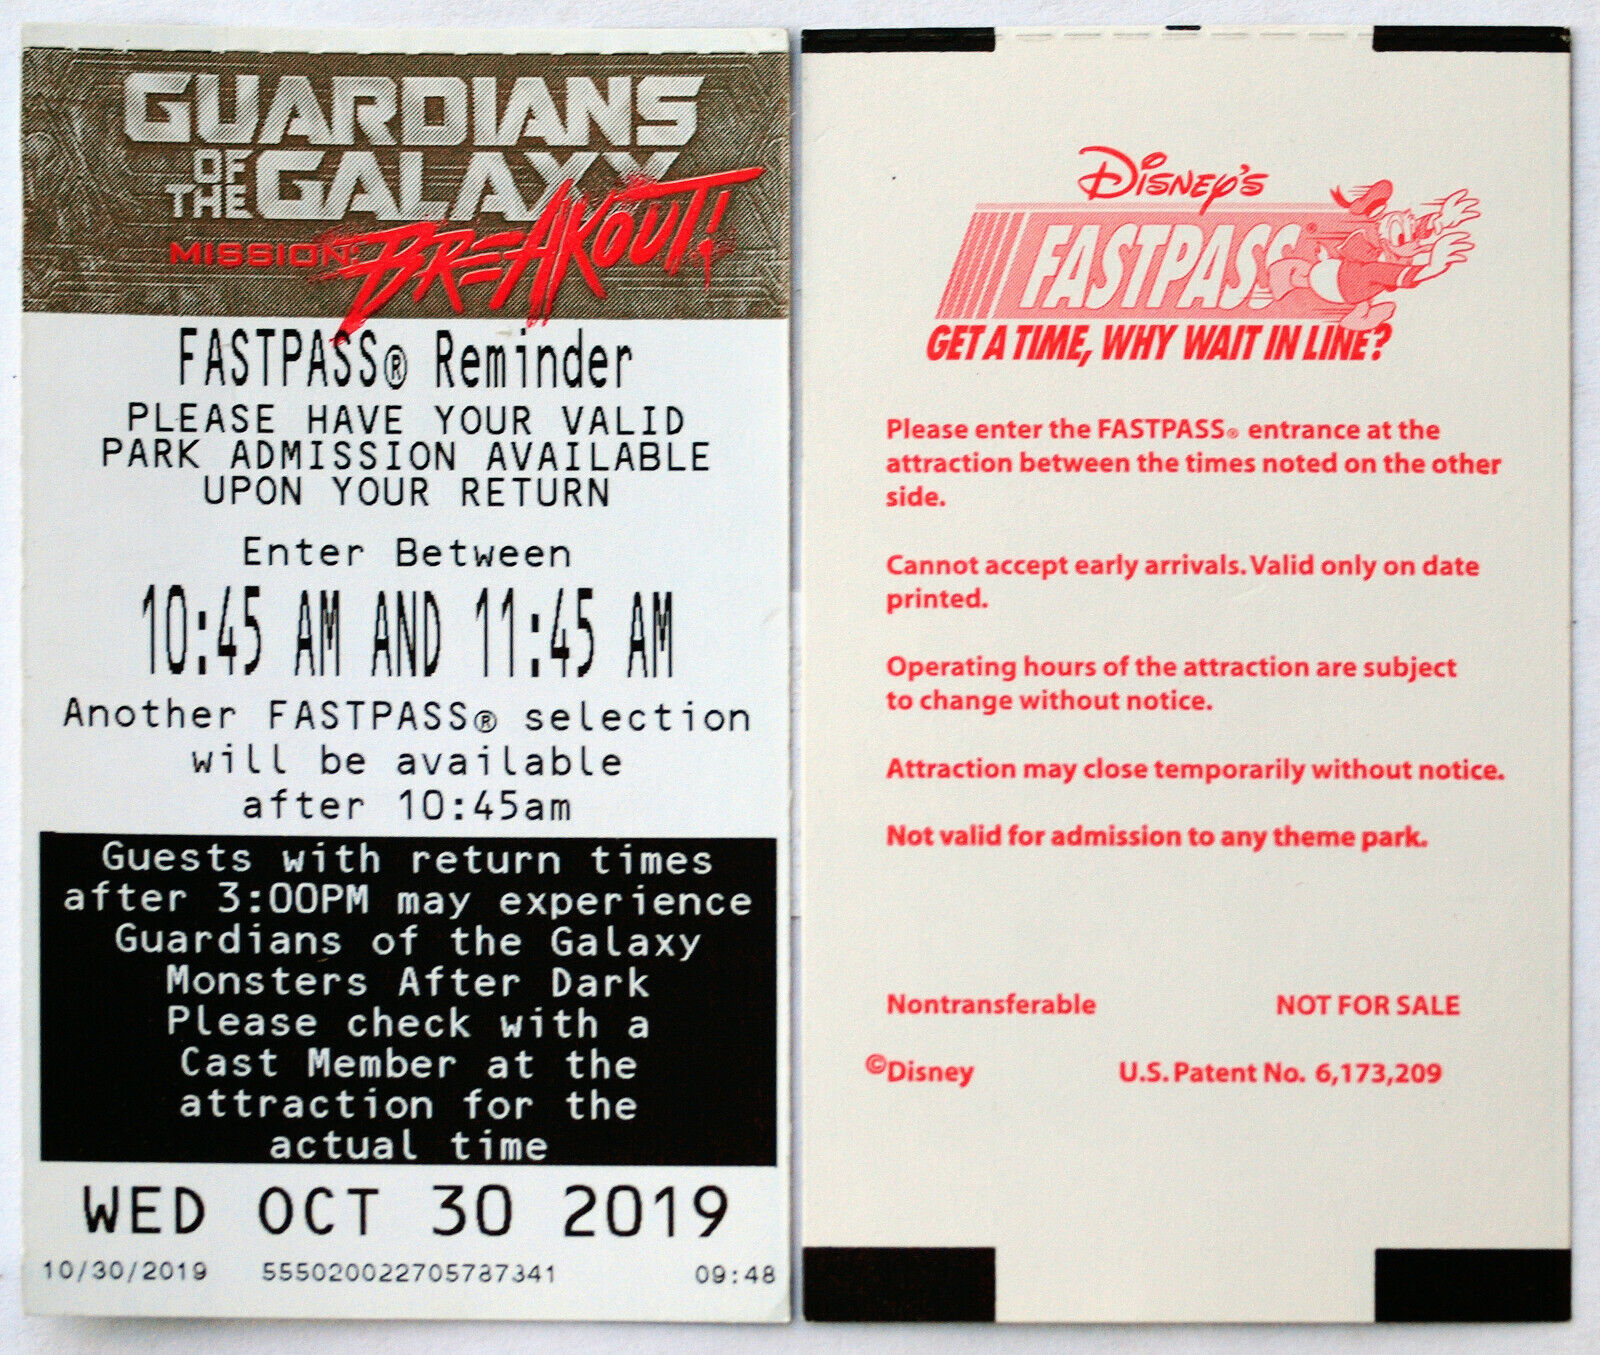 Calif. Adventure Fastpass: Guardians of the Galaxy Monsters After Dark 2019 # 1